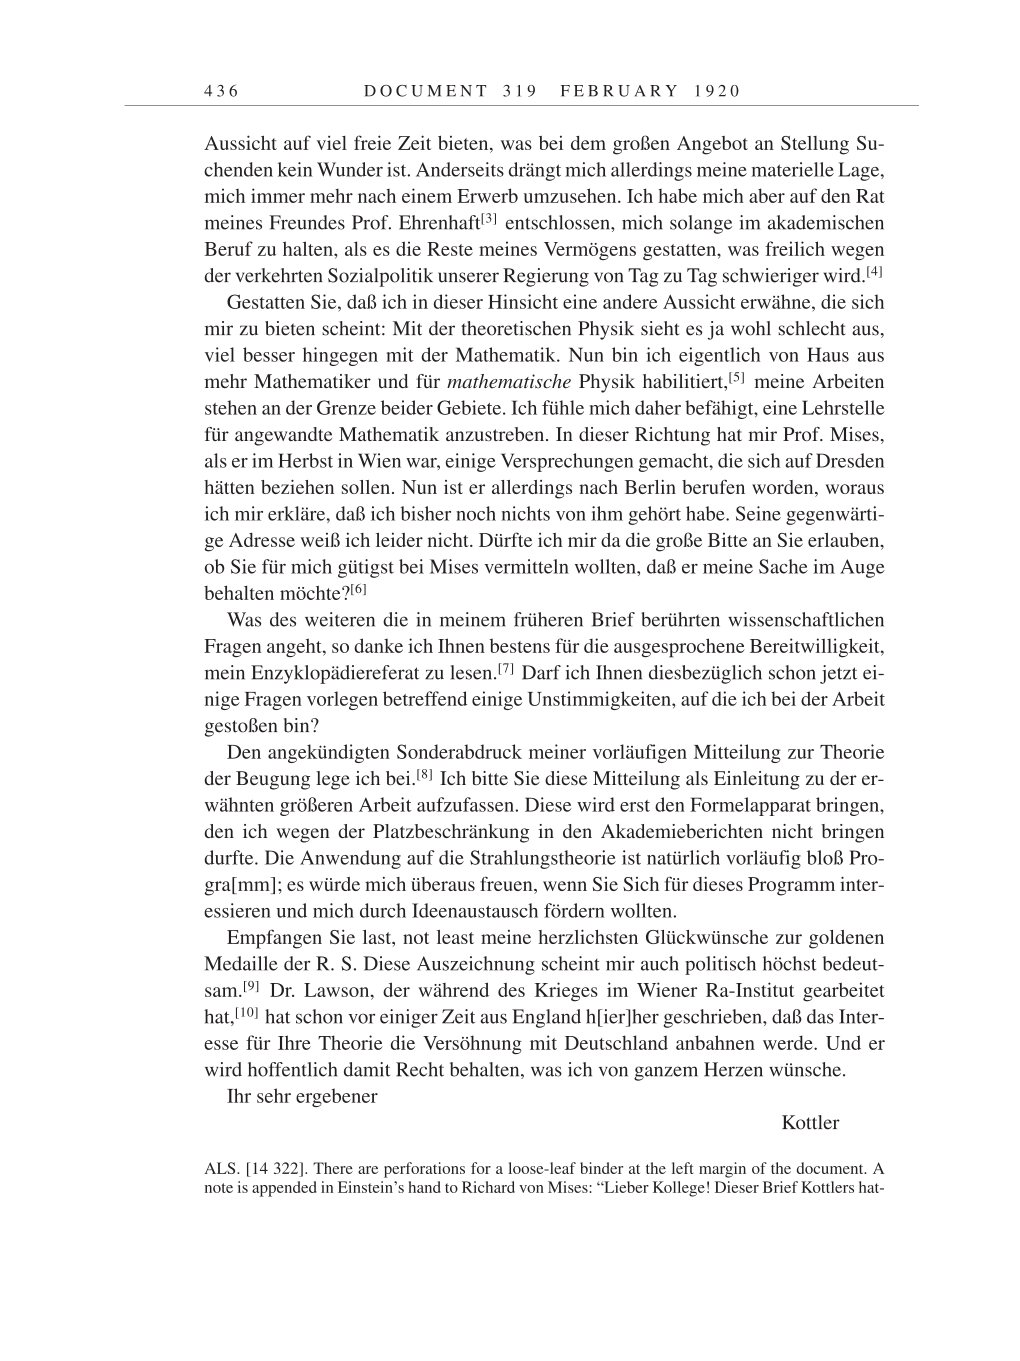 Volume 9: The Berlin Years: Correspondence January 1919-April 1920 page 436